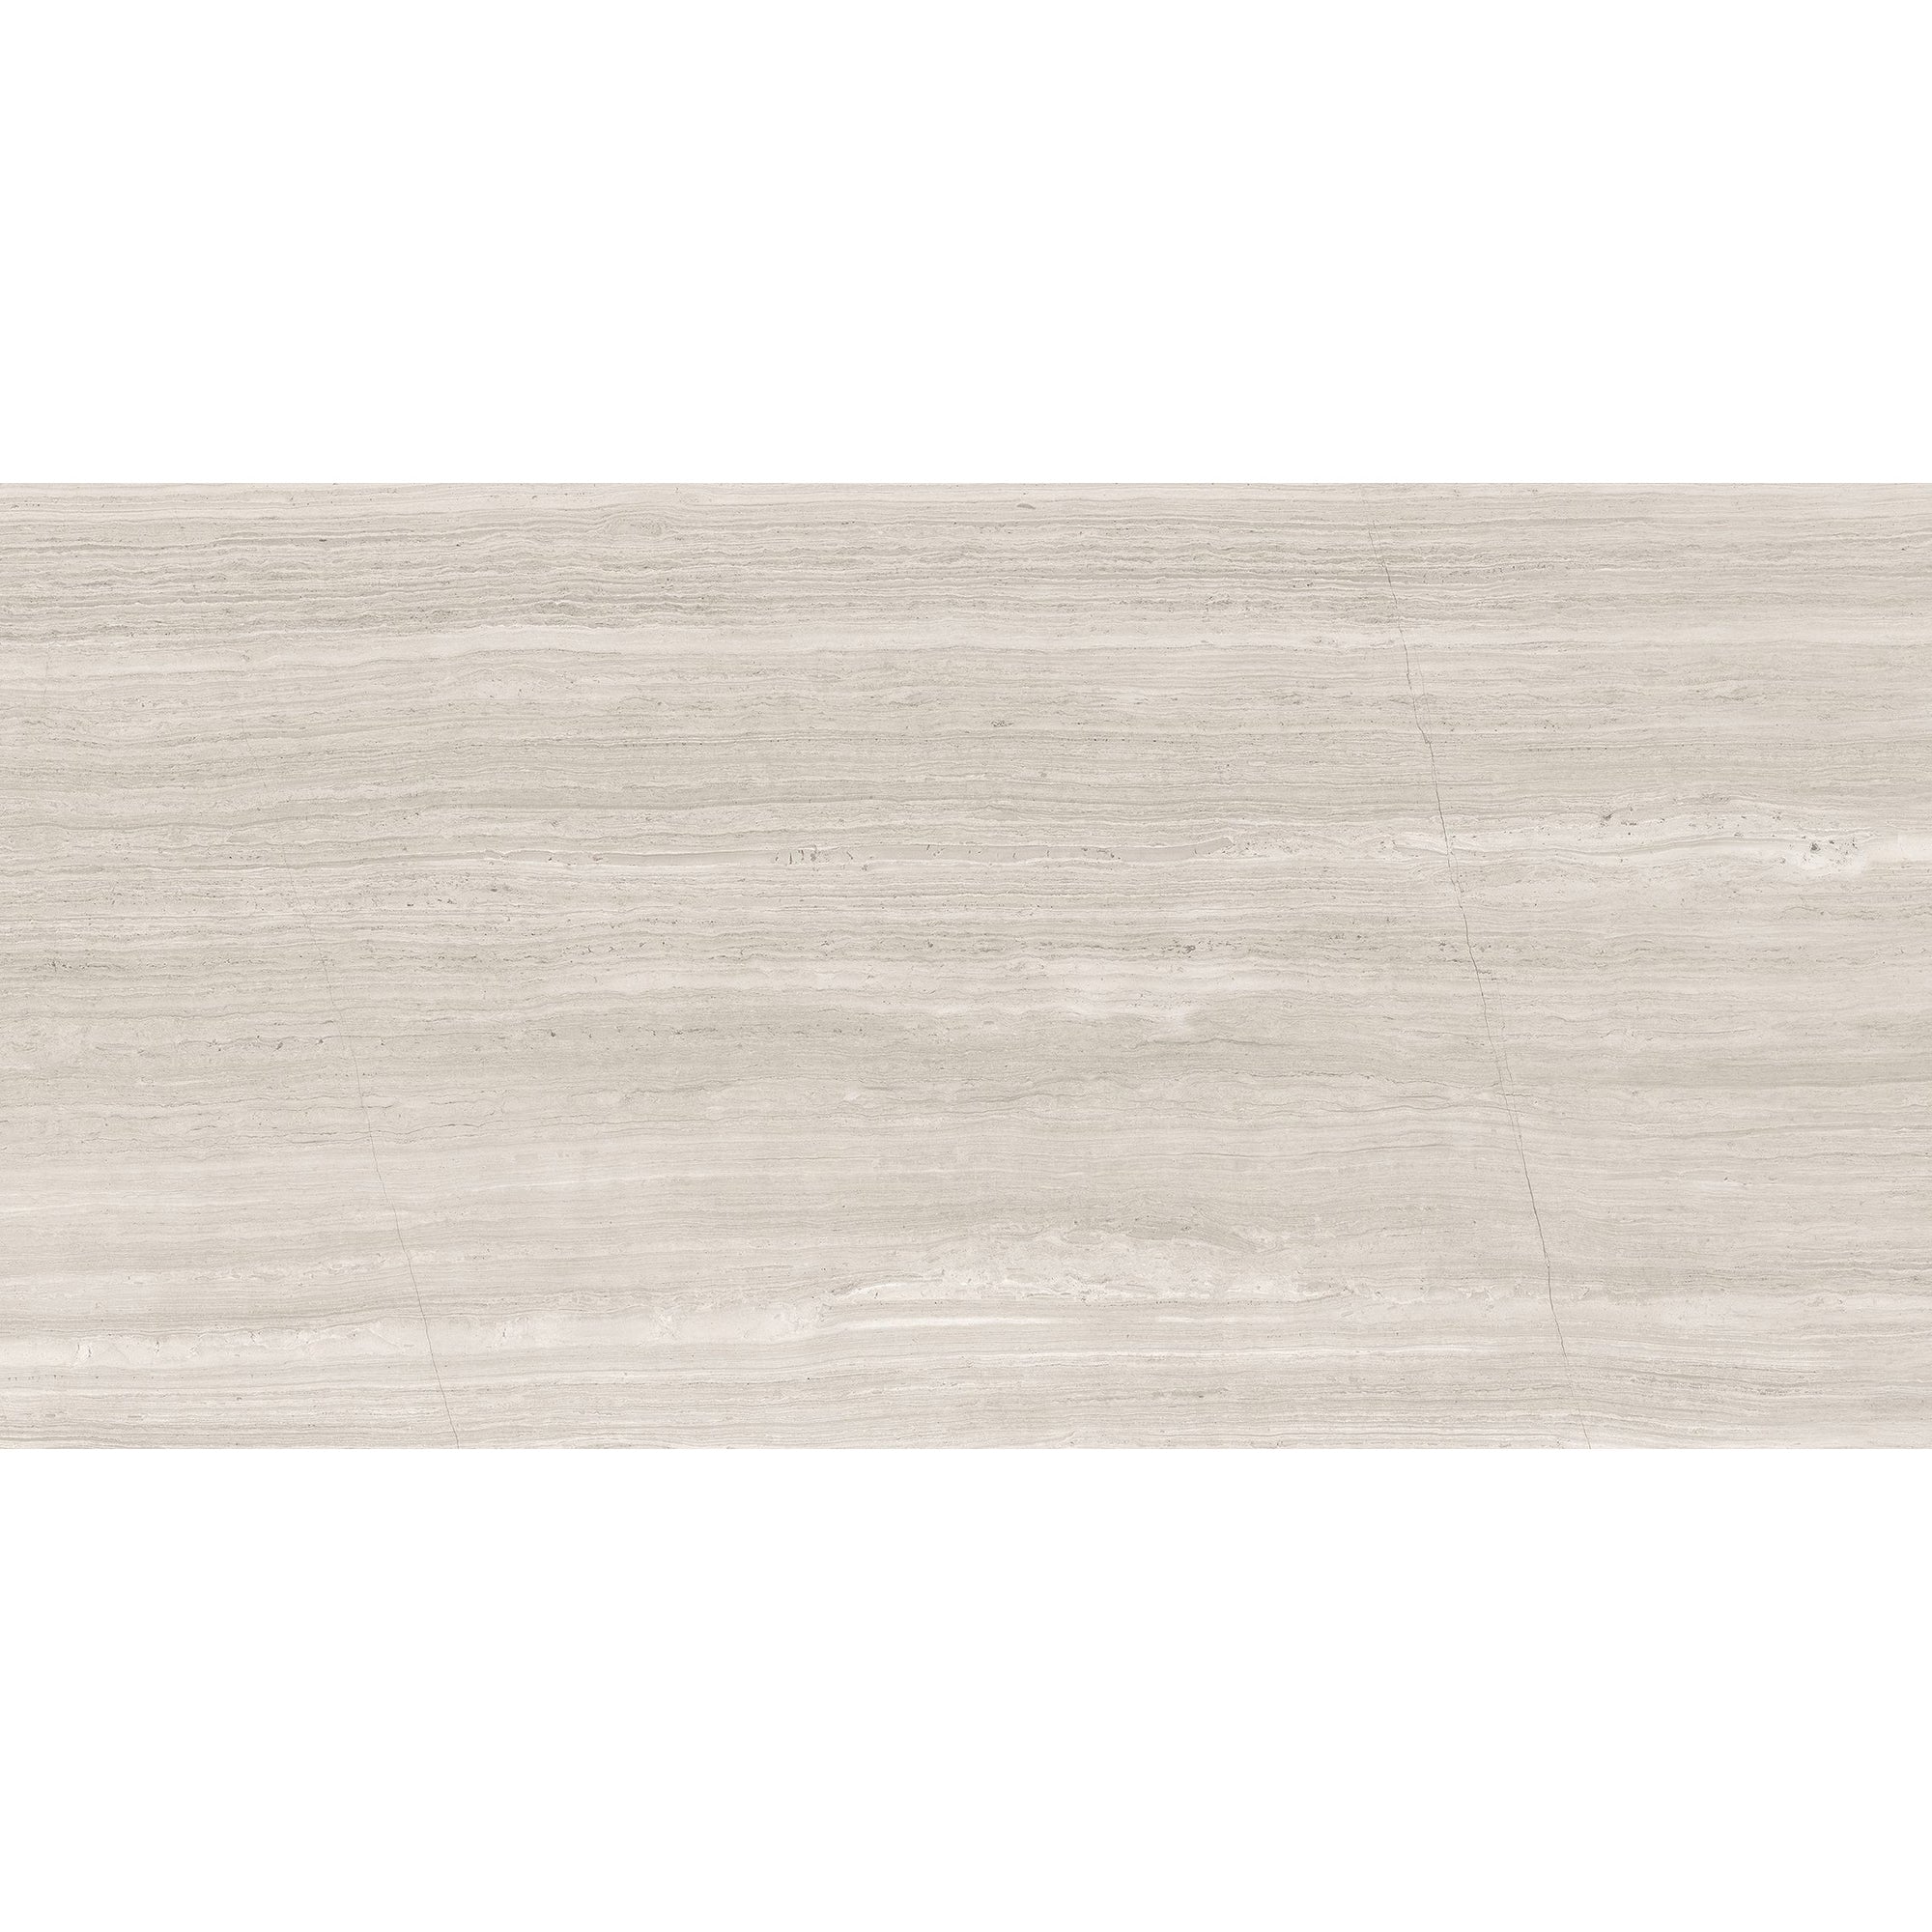 Anatolia Mayfair 16 in. x 32 in. HD Rectified Porcelain Tile - Strada Ash (Polished)